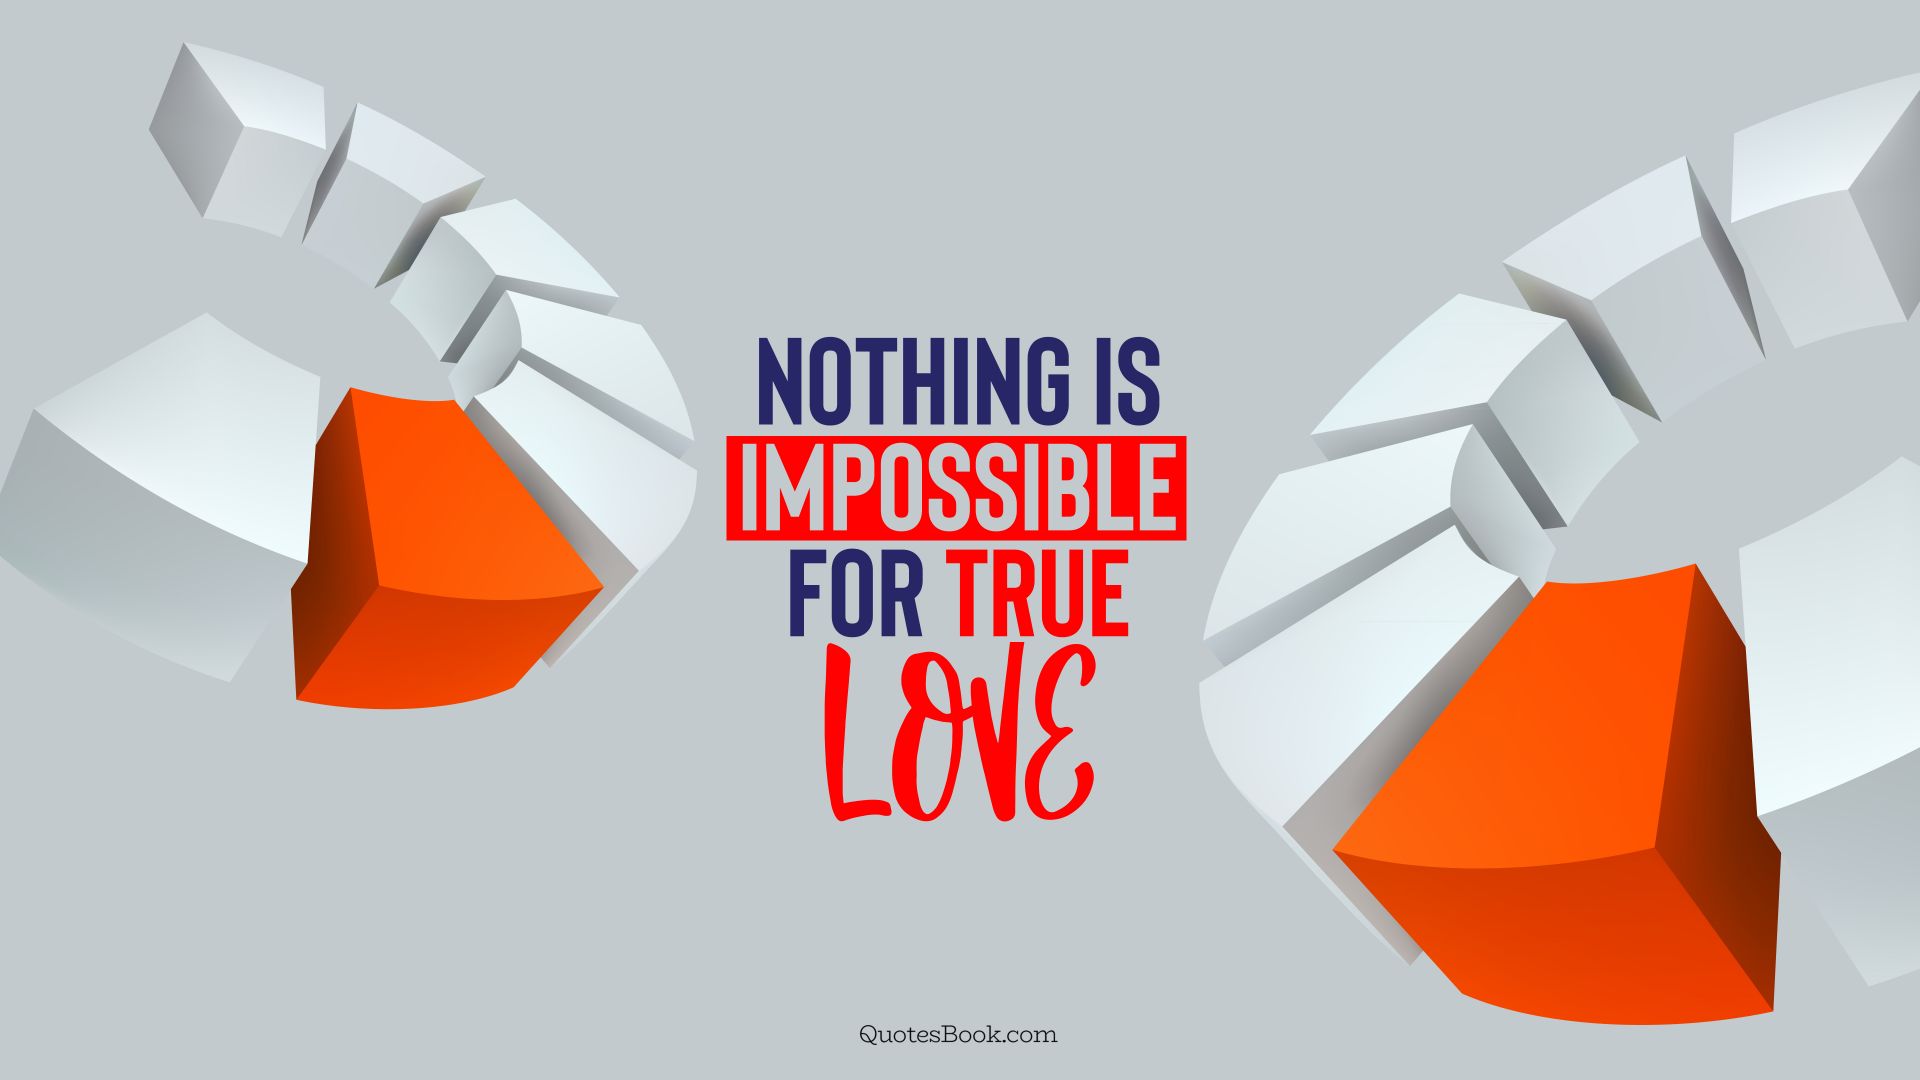 Nothing is impossible for true love. - Quote by QuotesBook